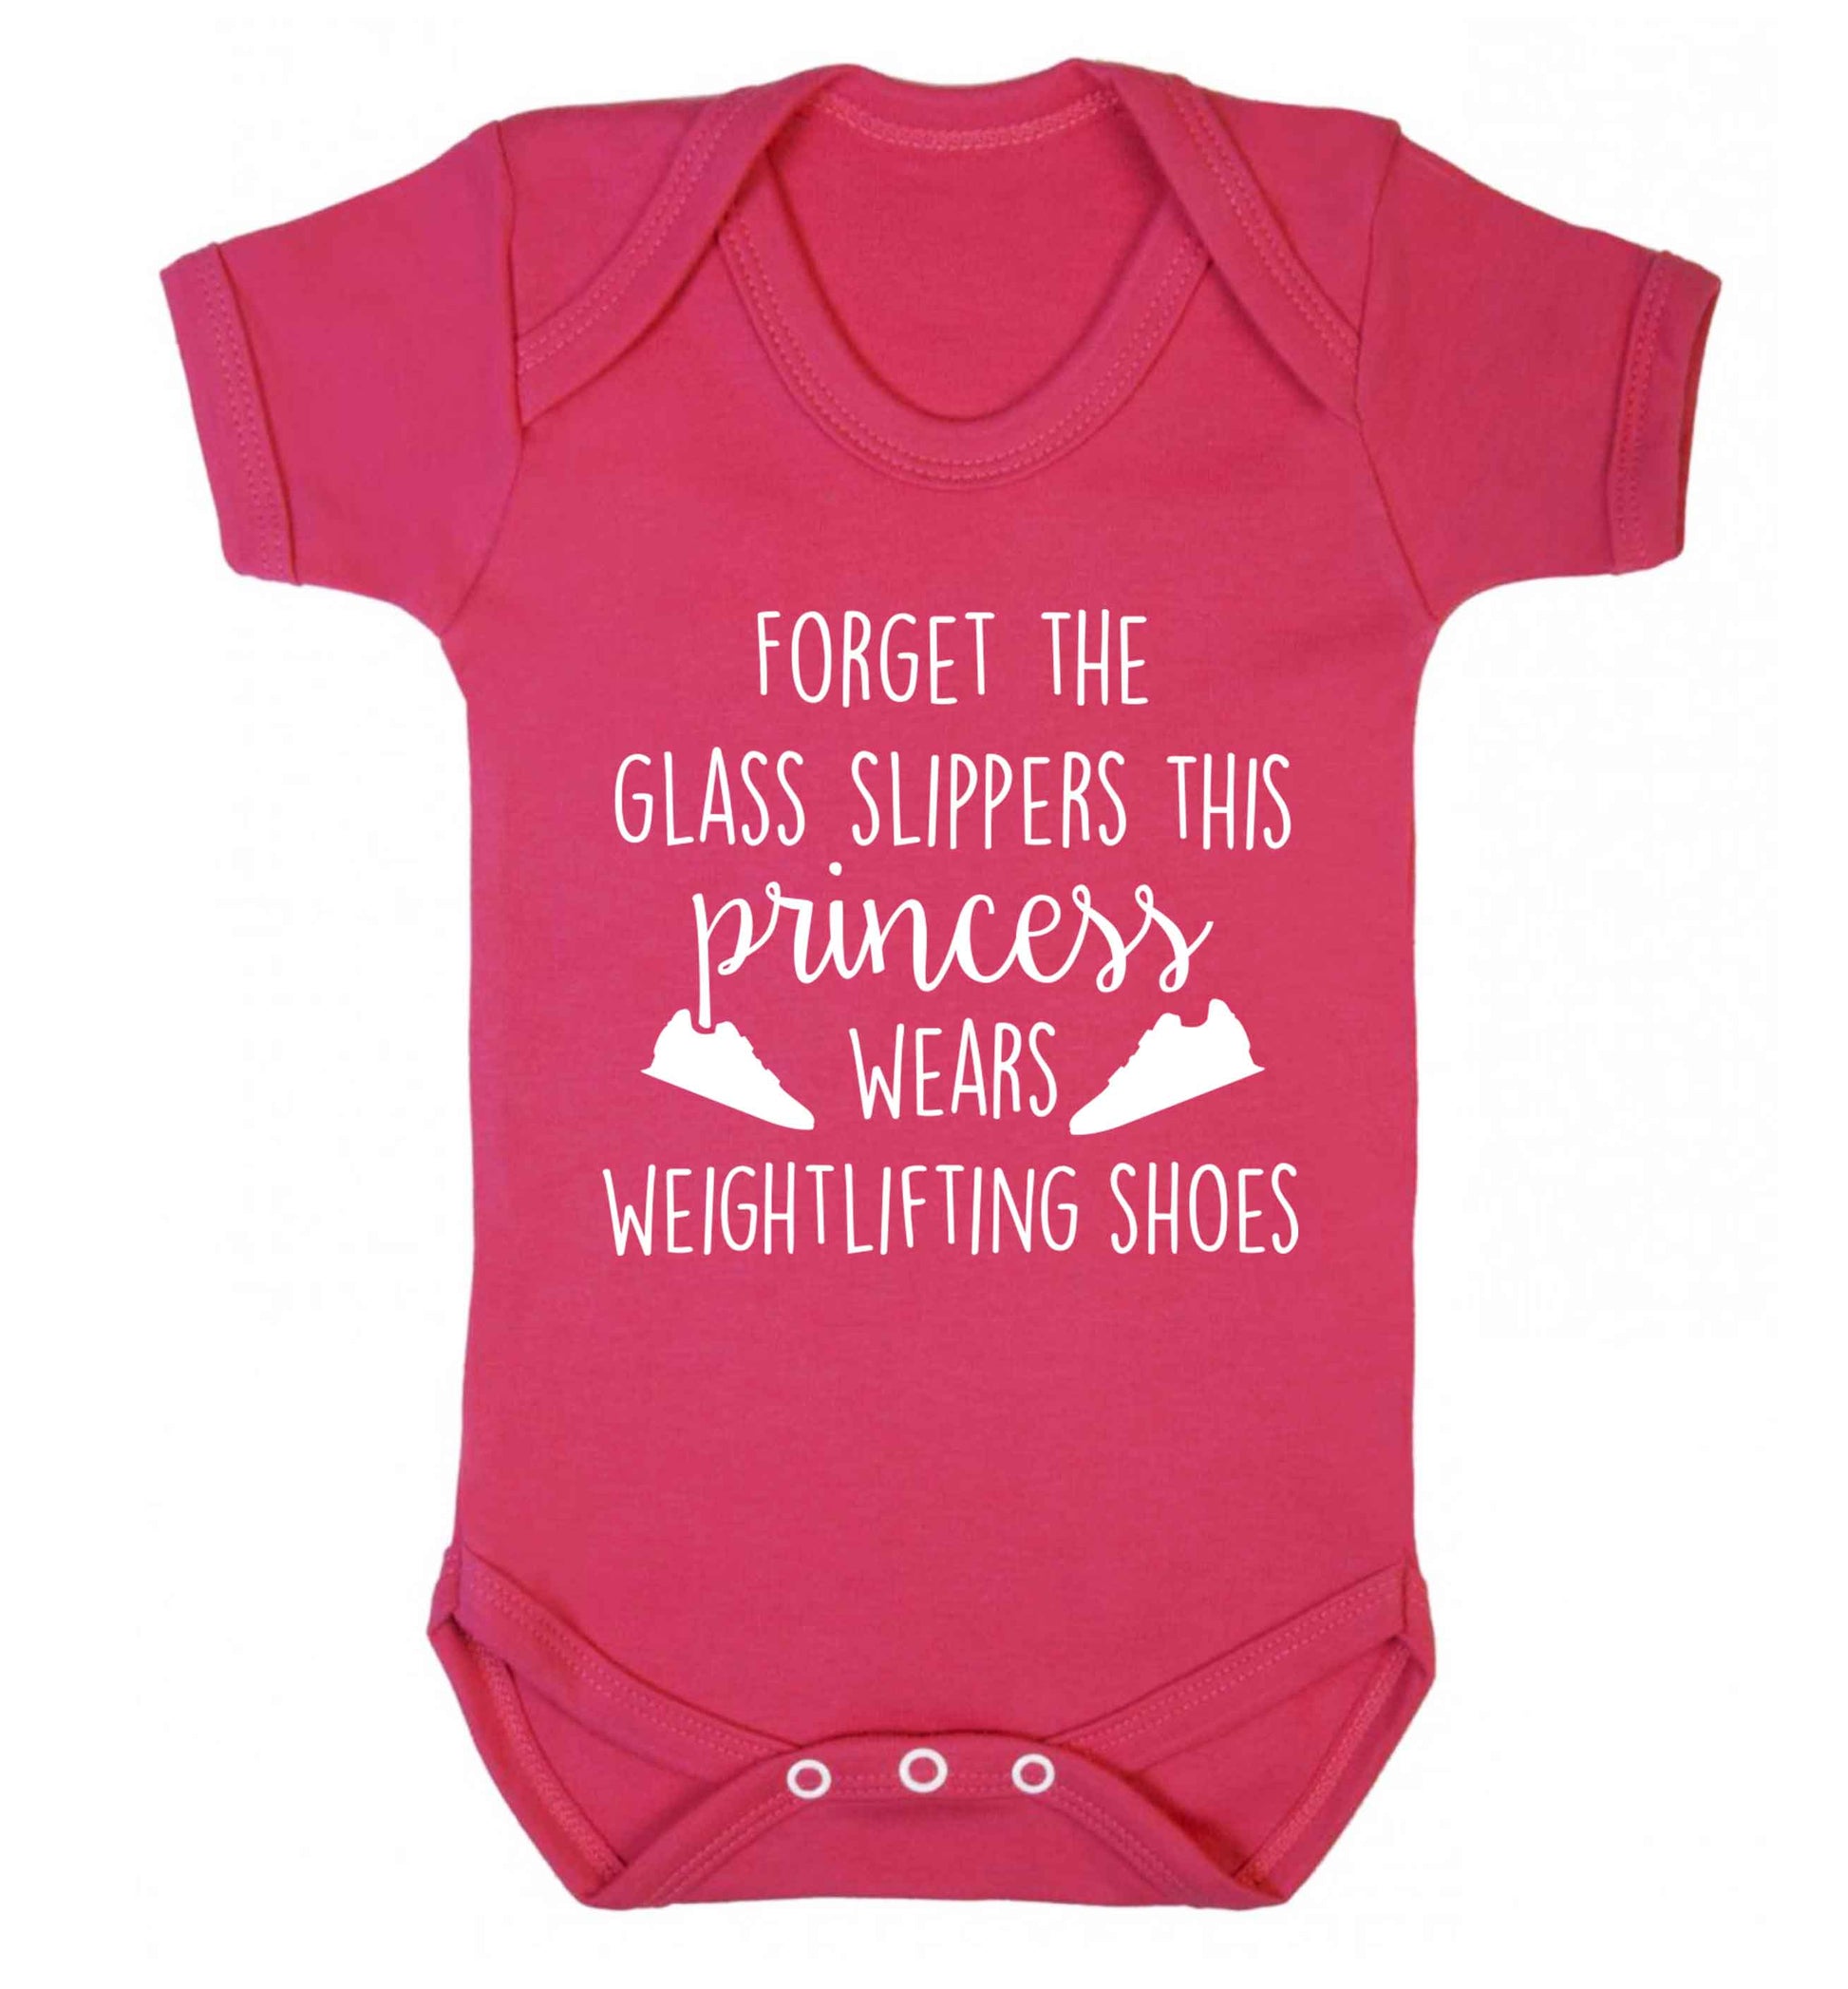 Forget the glass slippers this princess wears weightlifting shoes Baby Vest dark pink 18-24 months